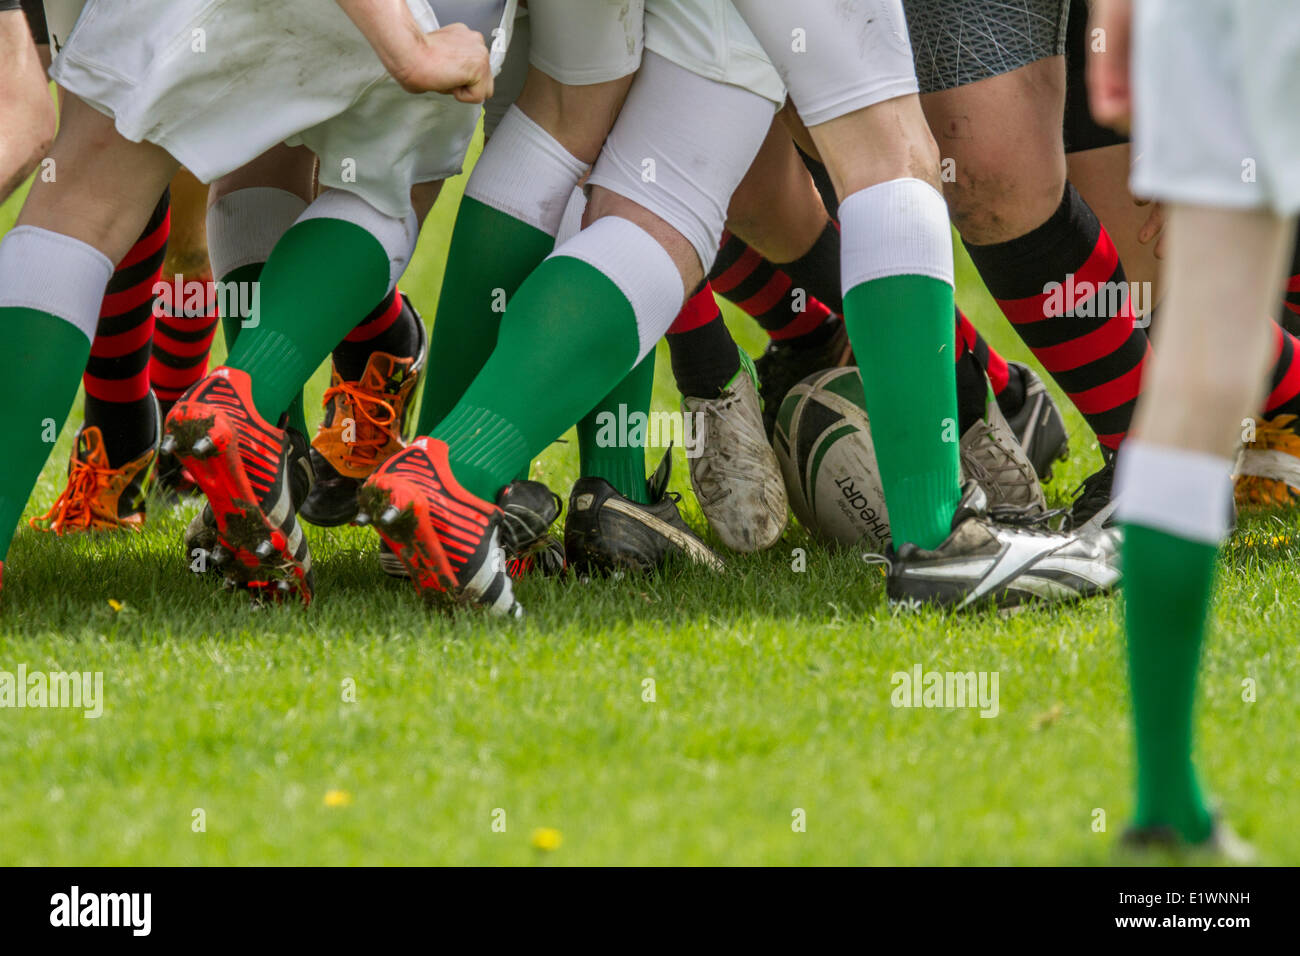 Rugby scrum of teenagers playing a game of rugby on a sunny day. Calgary, Alberta, Canada Stock Photo